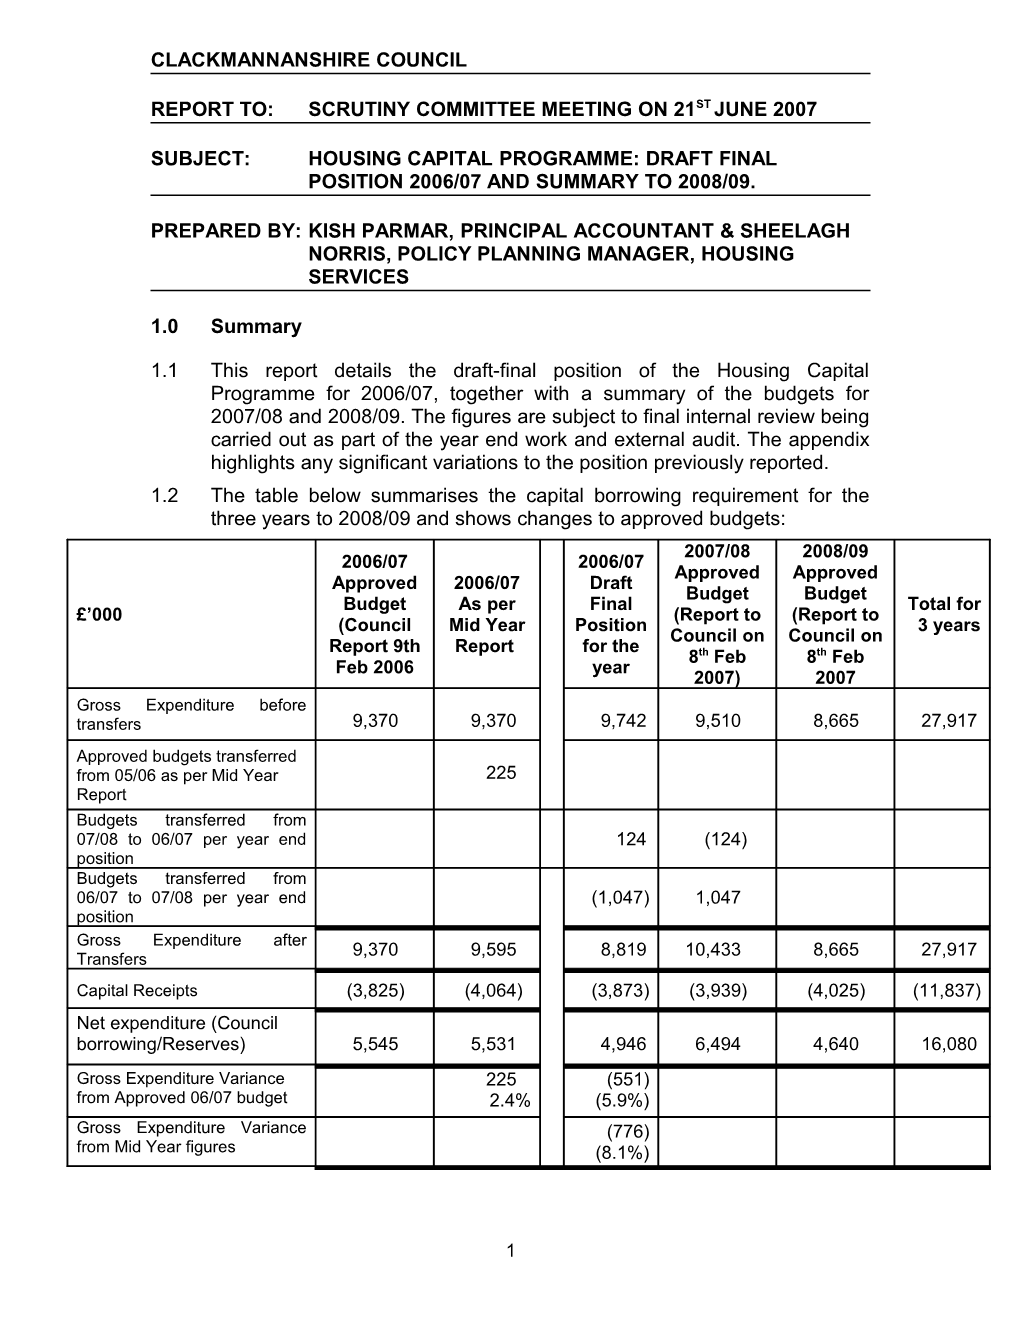 Subject: Housing Capital Programme: Draft Final Position 2006/07 and Summary to 2008/09